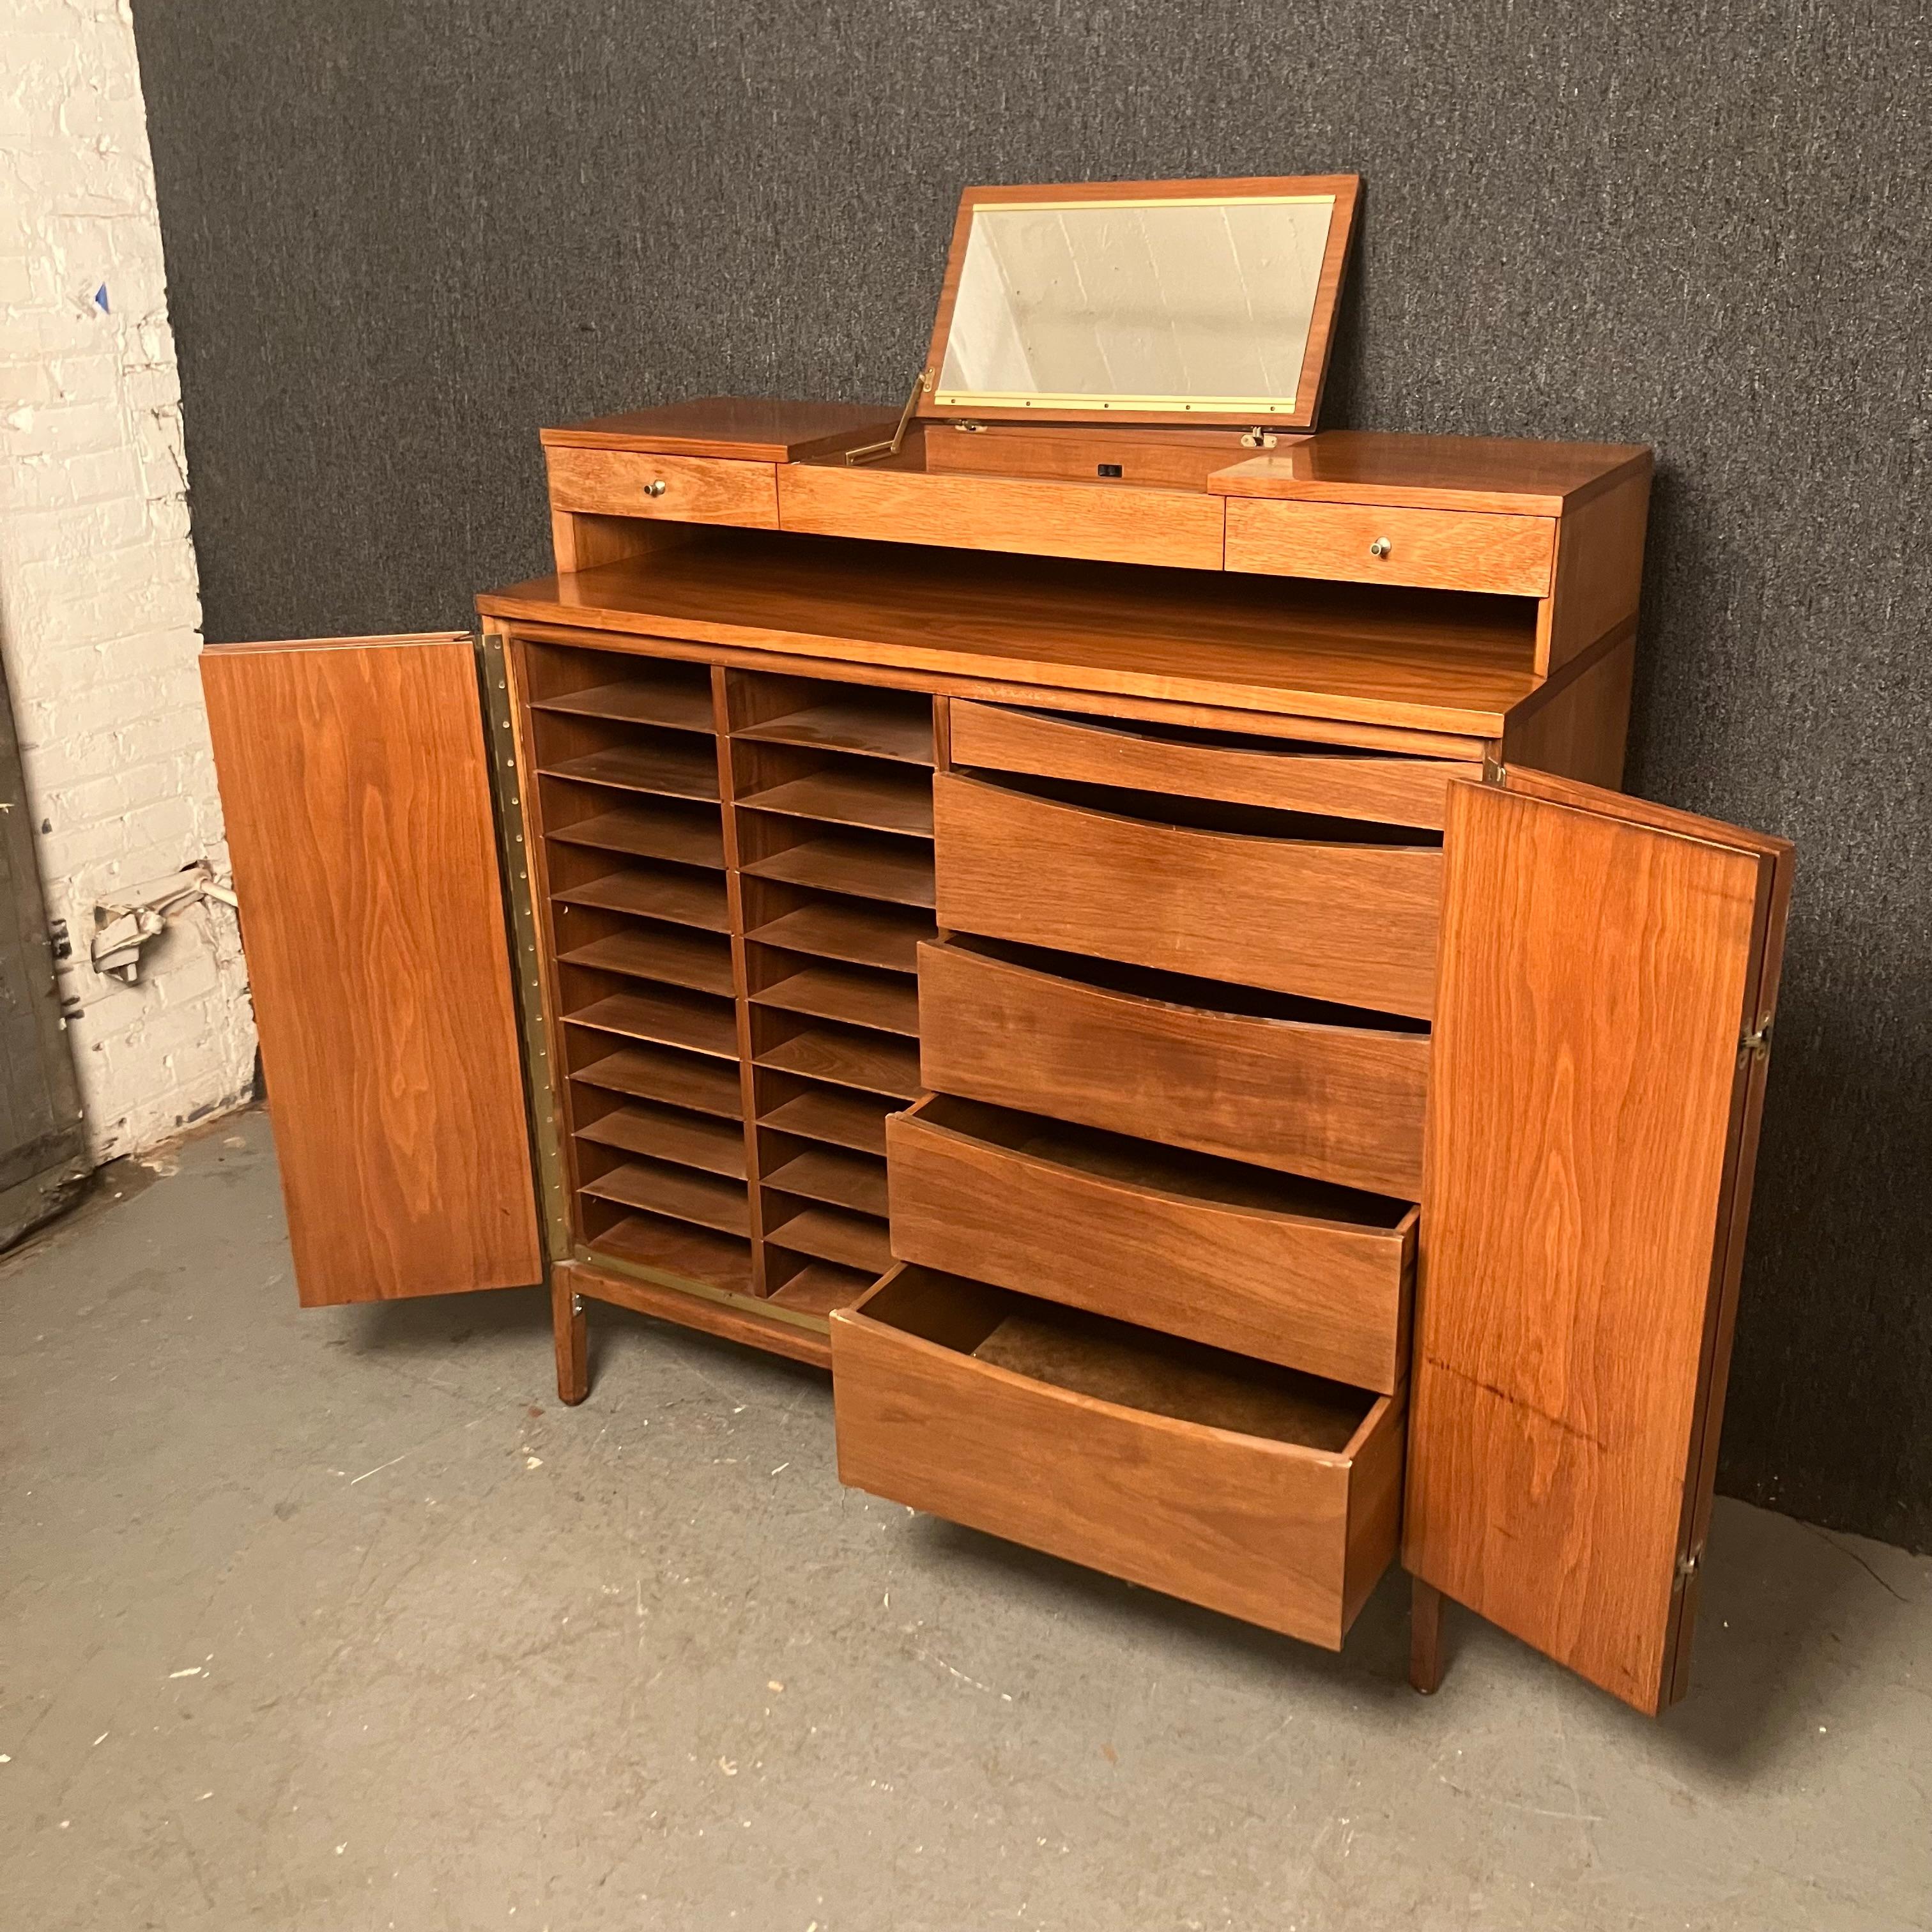 Beautiful vintage walnut gentleman's chest designed by Paul McCobb for his iconic mid-century modern series by Calvin Furniture. Framed in a beautifully grained walnut veneer, this impressive piece opens to reveal twenty wooden cubbyholes alongside